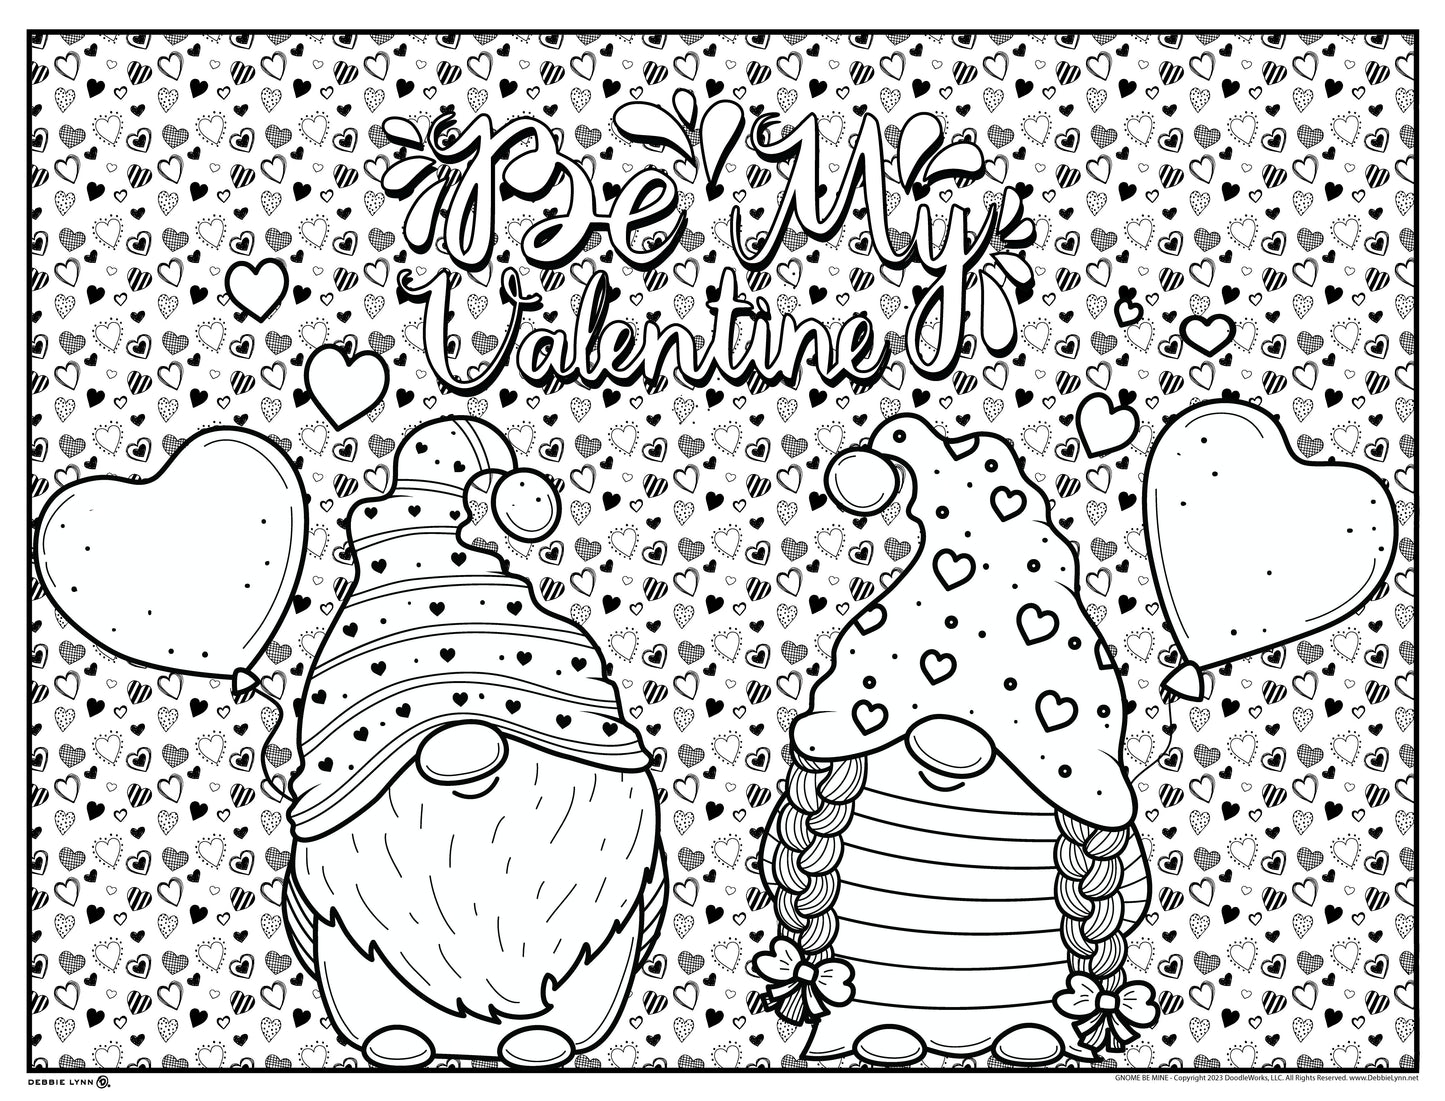 Gnome Be Mine Valentines Day Personalized Giant Coloring Poster 46"x60"